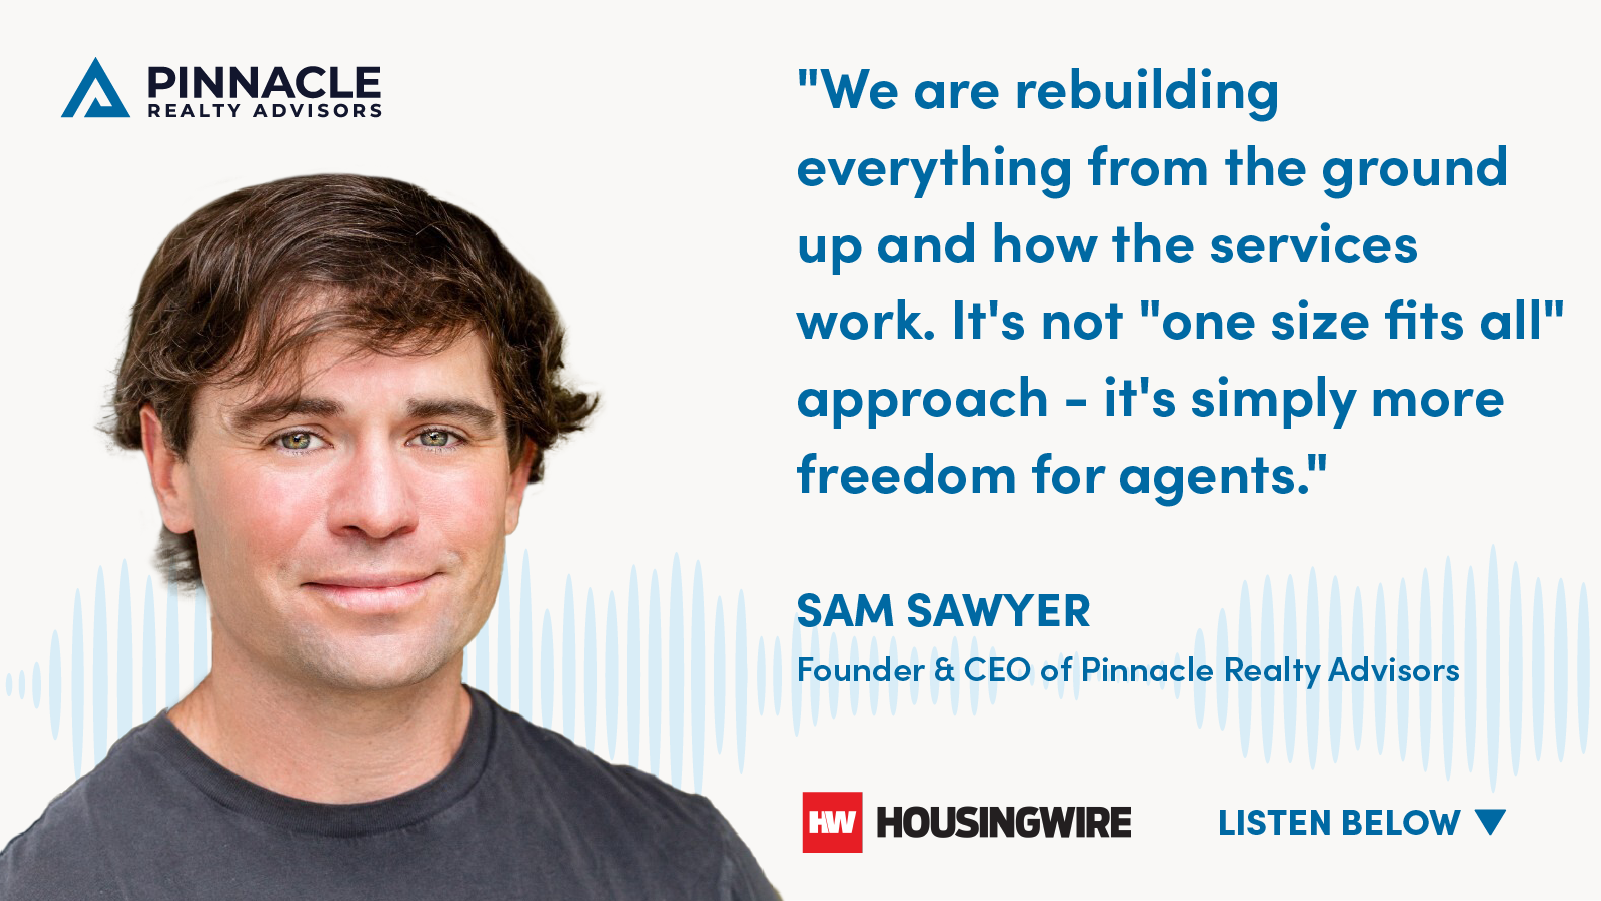 Sam Sawyer Talks About Expansion During a Difficult Market with Housing Wire